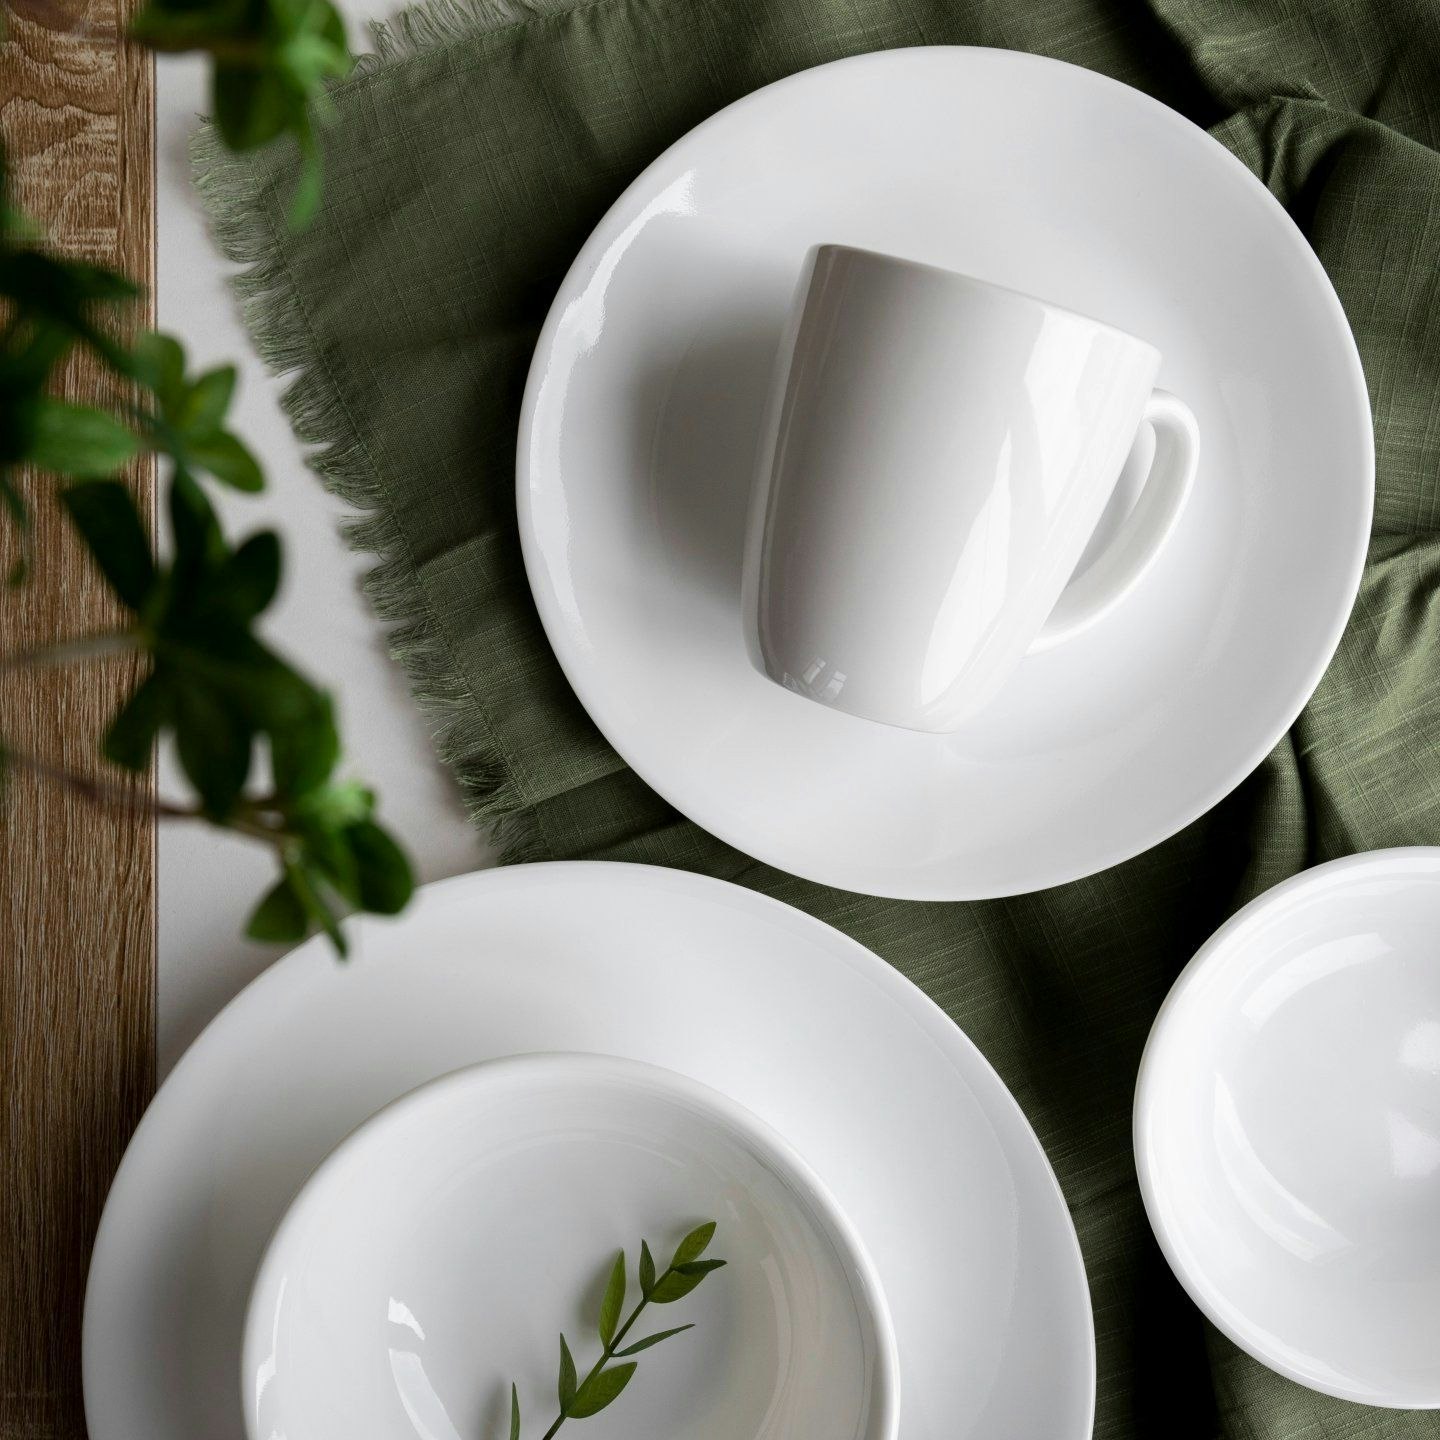 Corelle Dinnerware | A Leader in Quality, Durability, and Innovation